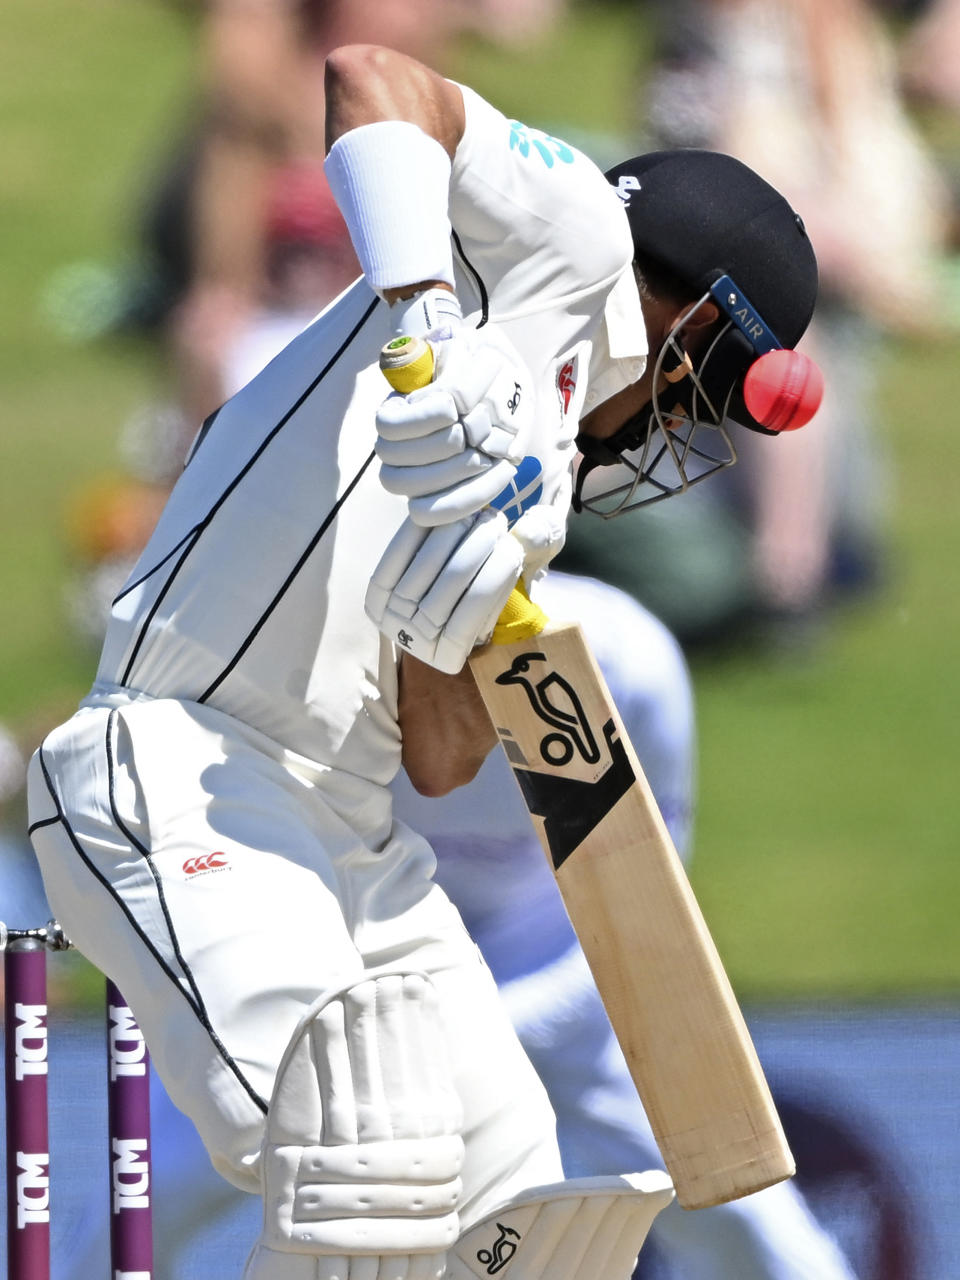 New Zealand's Neil Wagner is struck by a delivery from England on the fourth day of their cricket test match in Tauranga, New Zealand, Sunday, Feb. 19, 2023. (Andrew Cornaga/Photosport via AP)